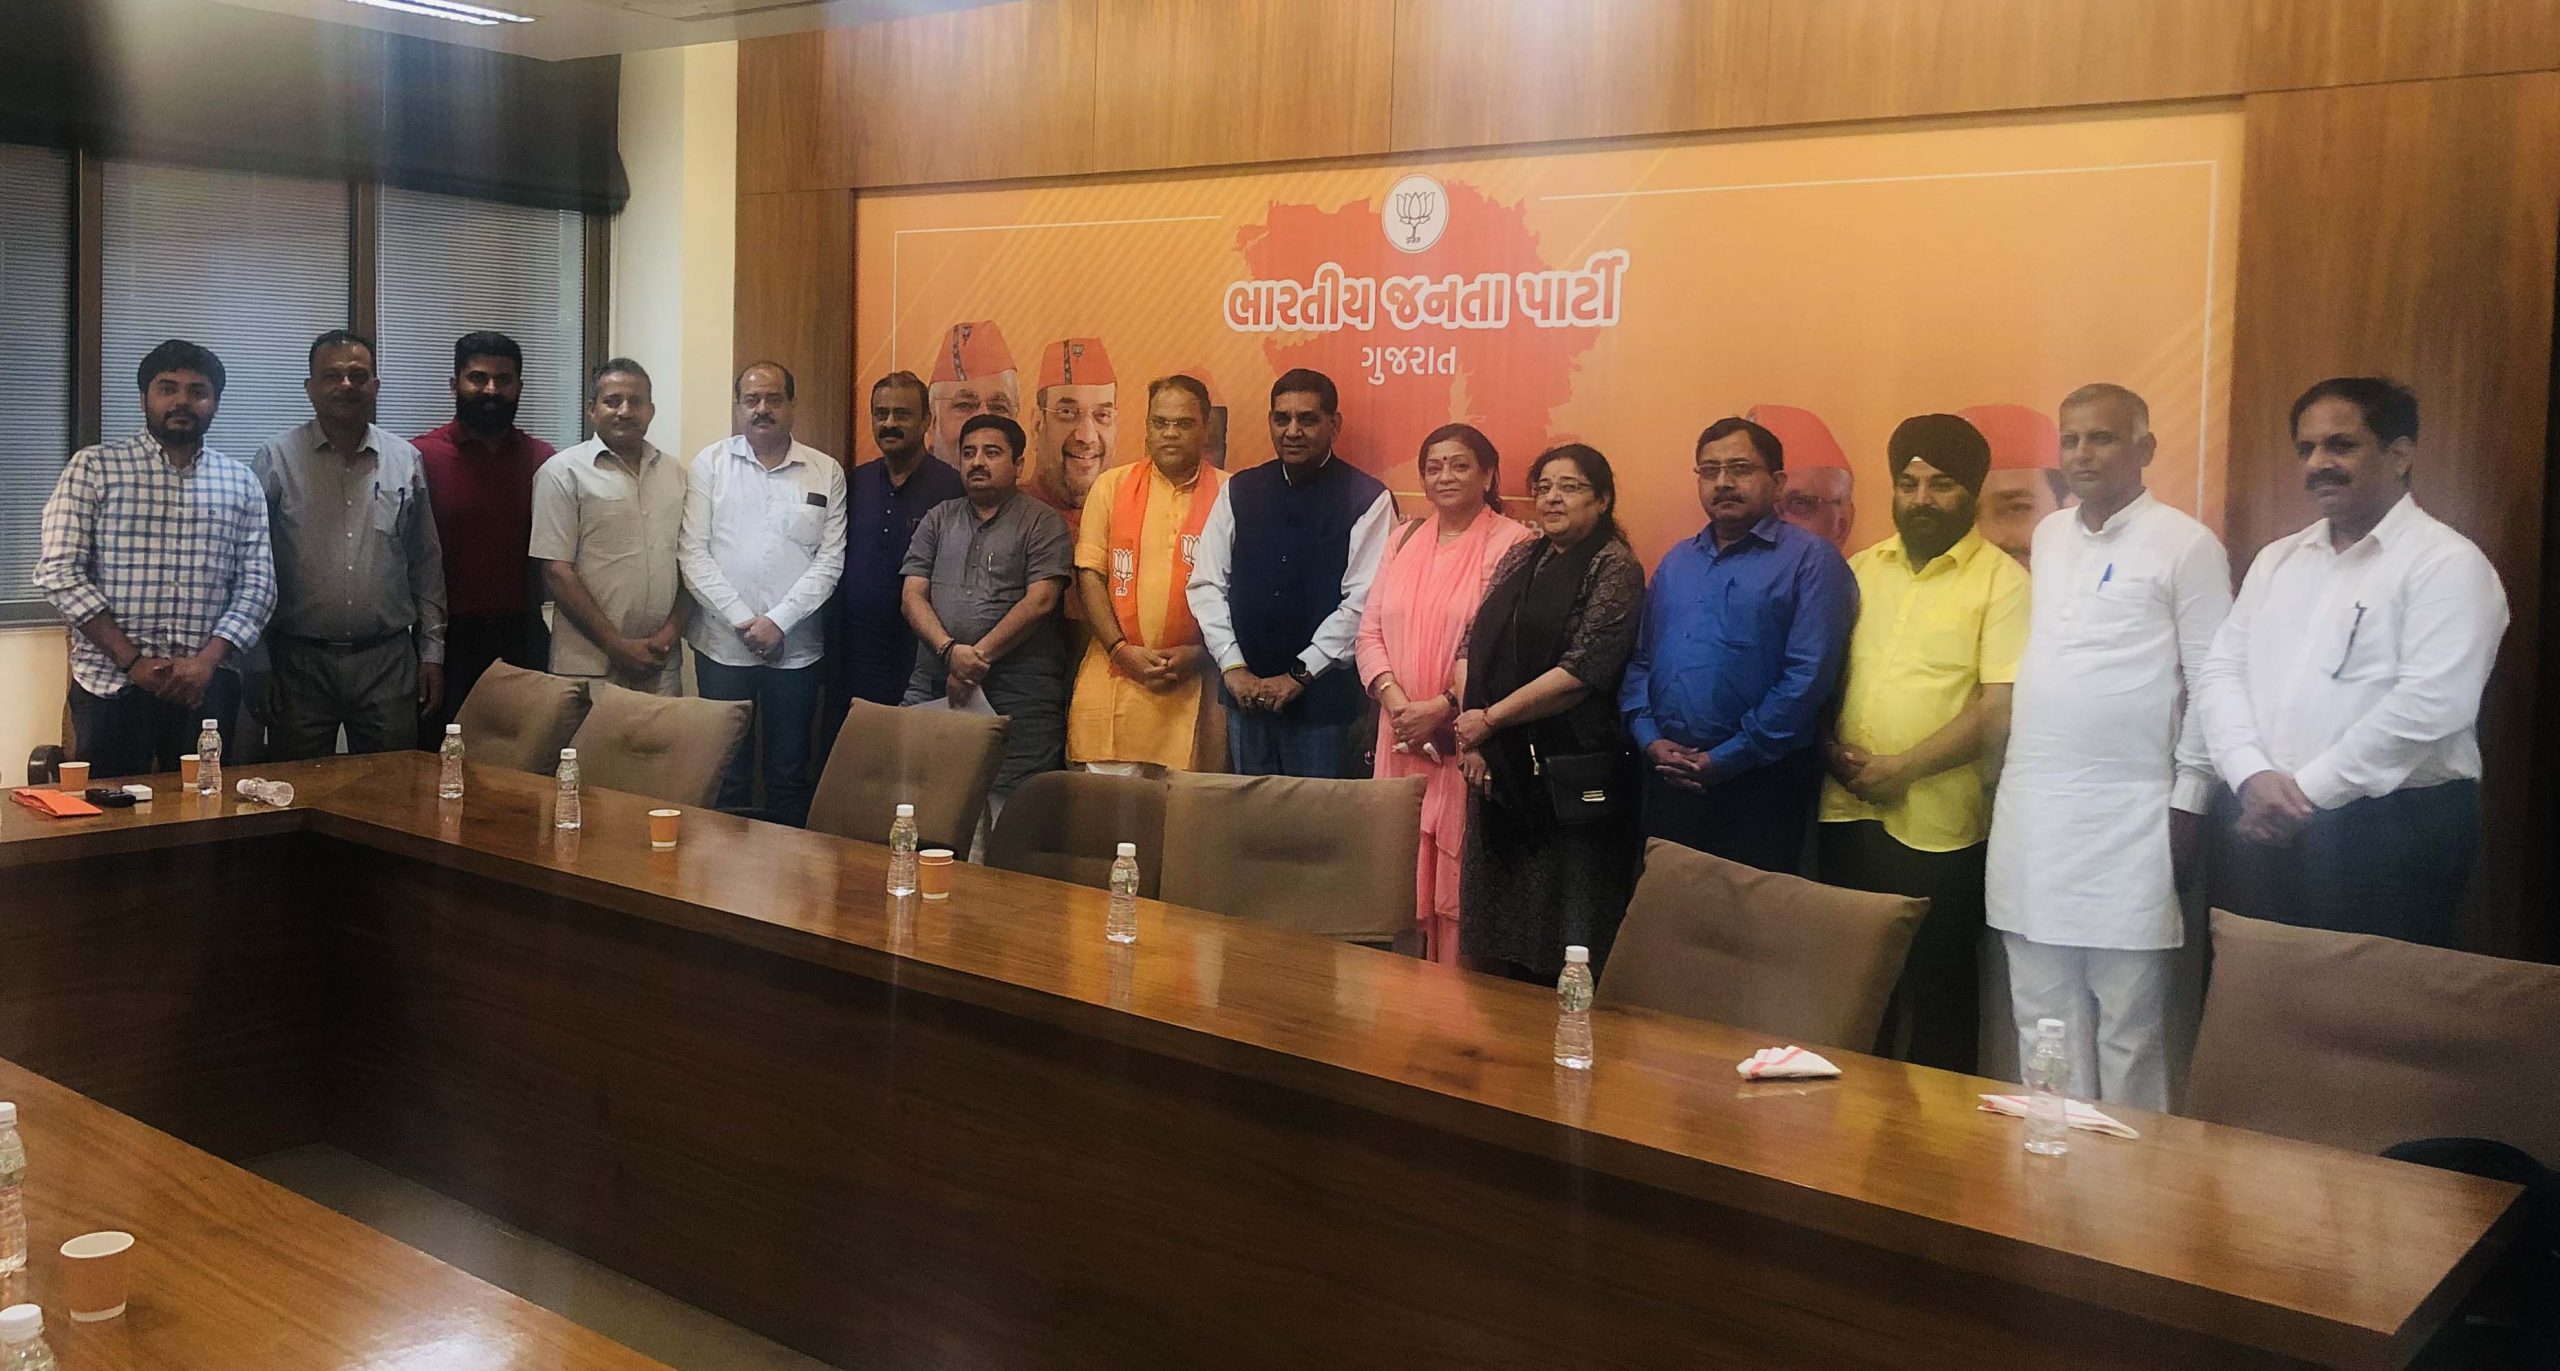 All India Institute of Local Self Government, Ahmedabad, Gujarat has organized an Integrated Sensitization Programme under Finance and Revenue for Elected Representatives from Jammu Municipal Corporation at Ahmedabad